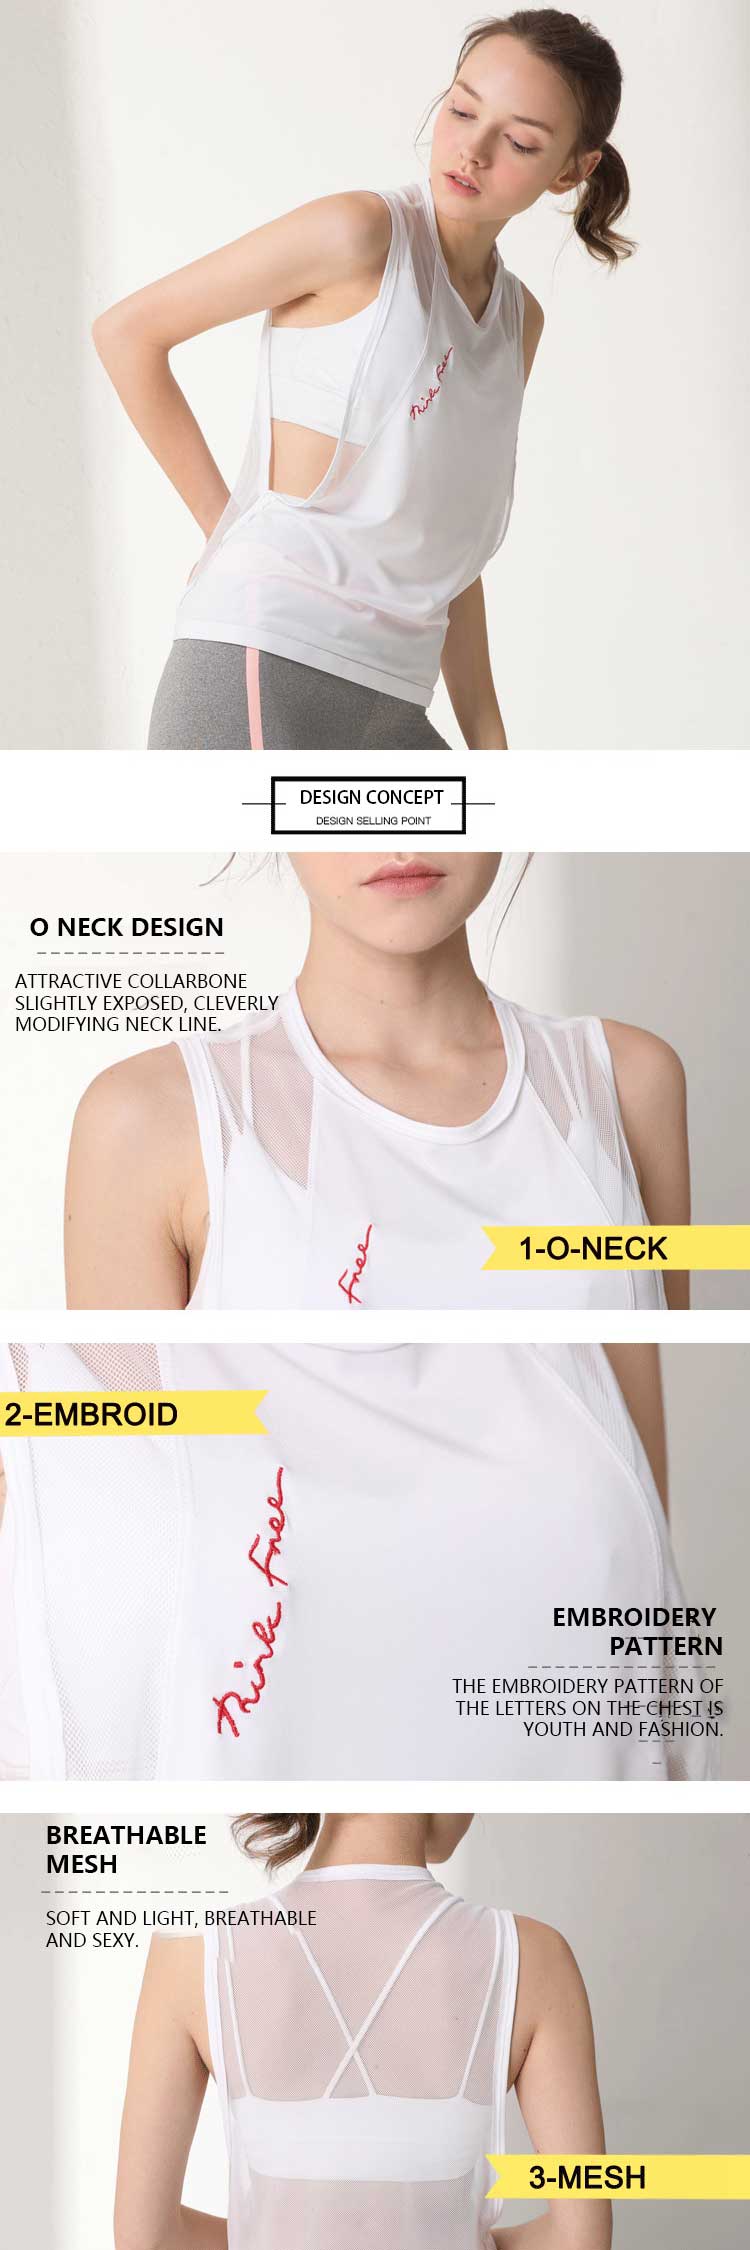 Loose workout tanks breathable design concepts